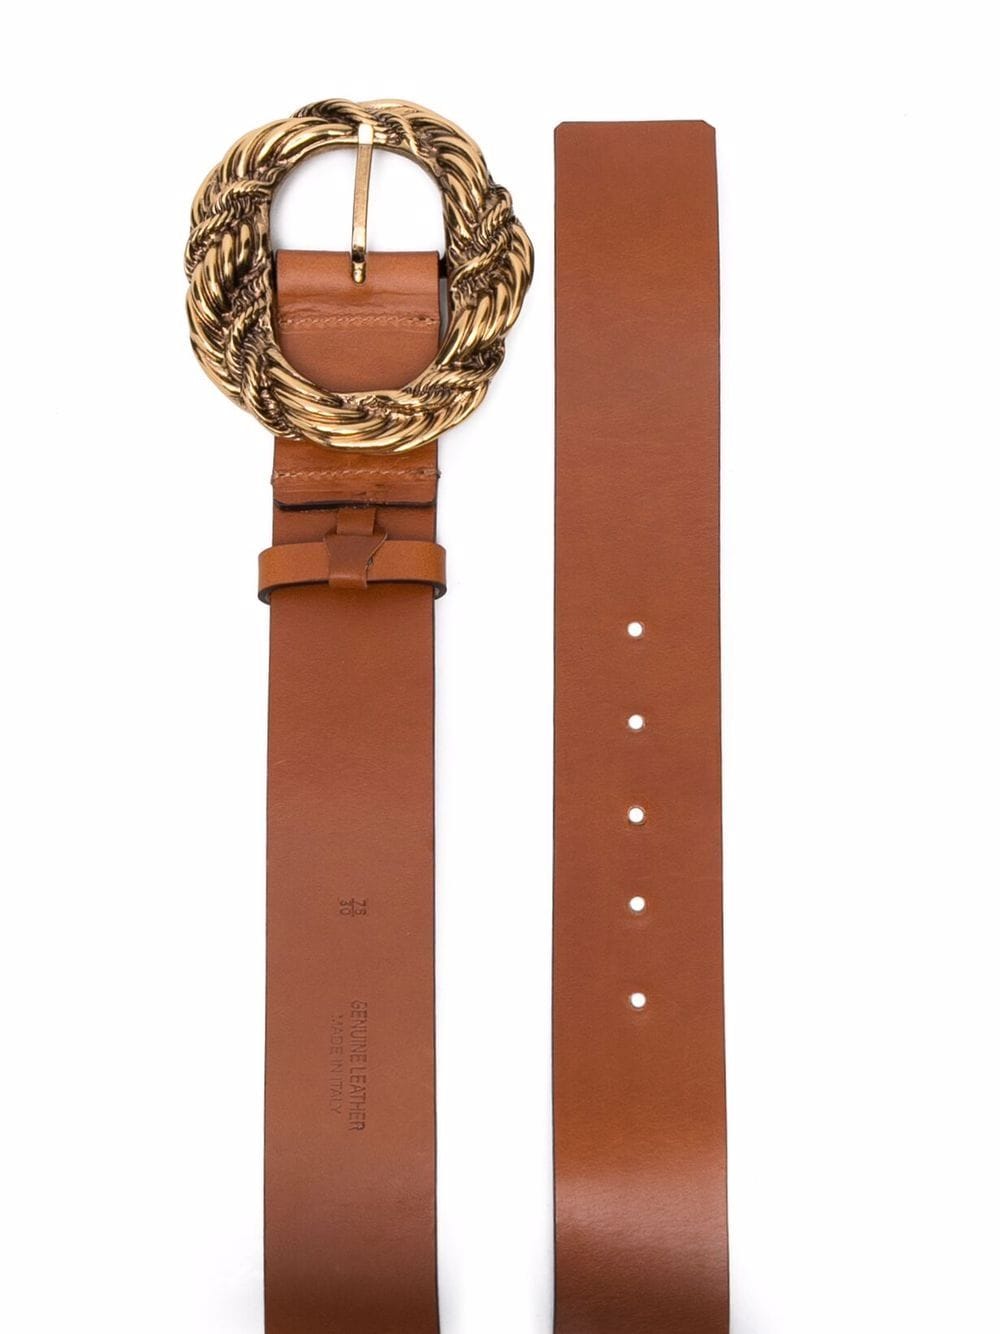 Rope-buckle belt by Etro made 100% from calf leather in brown and golden tone buckle, Made in Italy, New Arrivals, SS22, Espace Cannelle